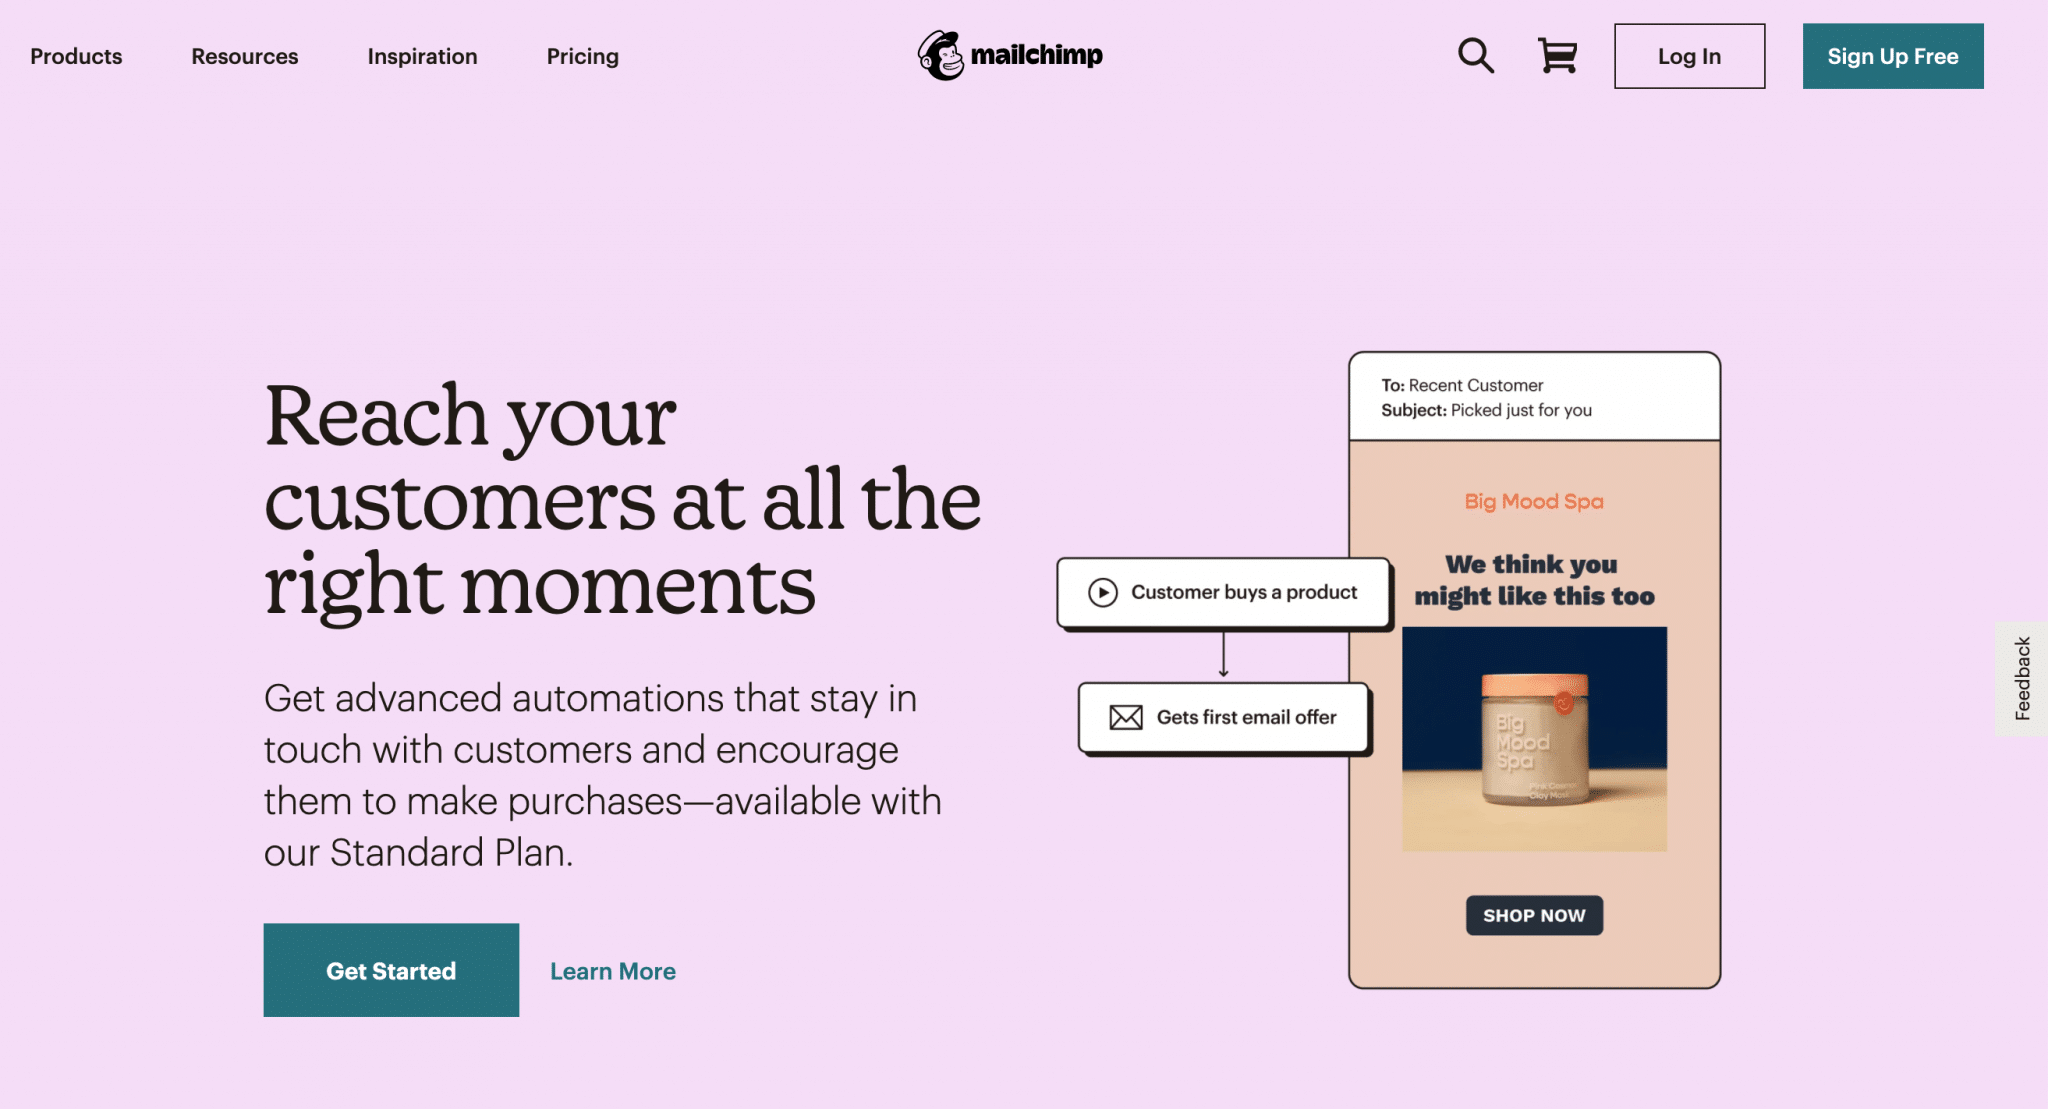 The website homepage of Mailchimp.